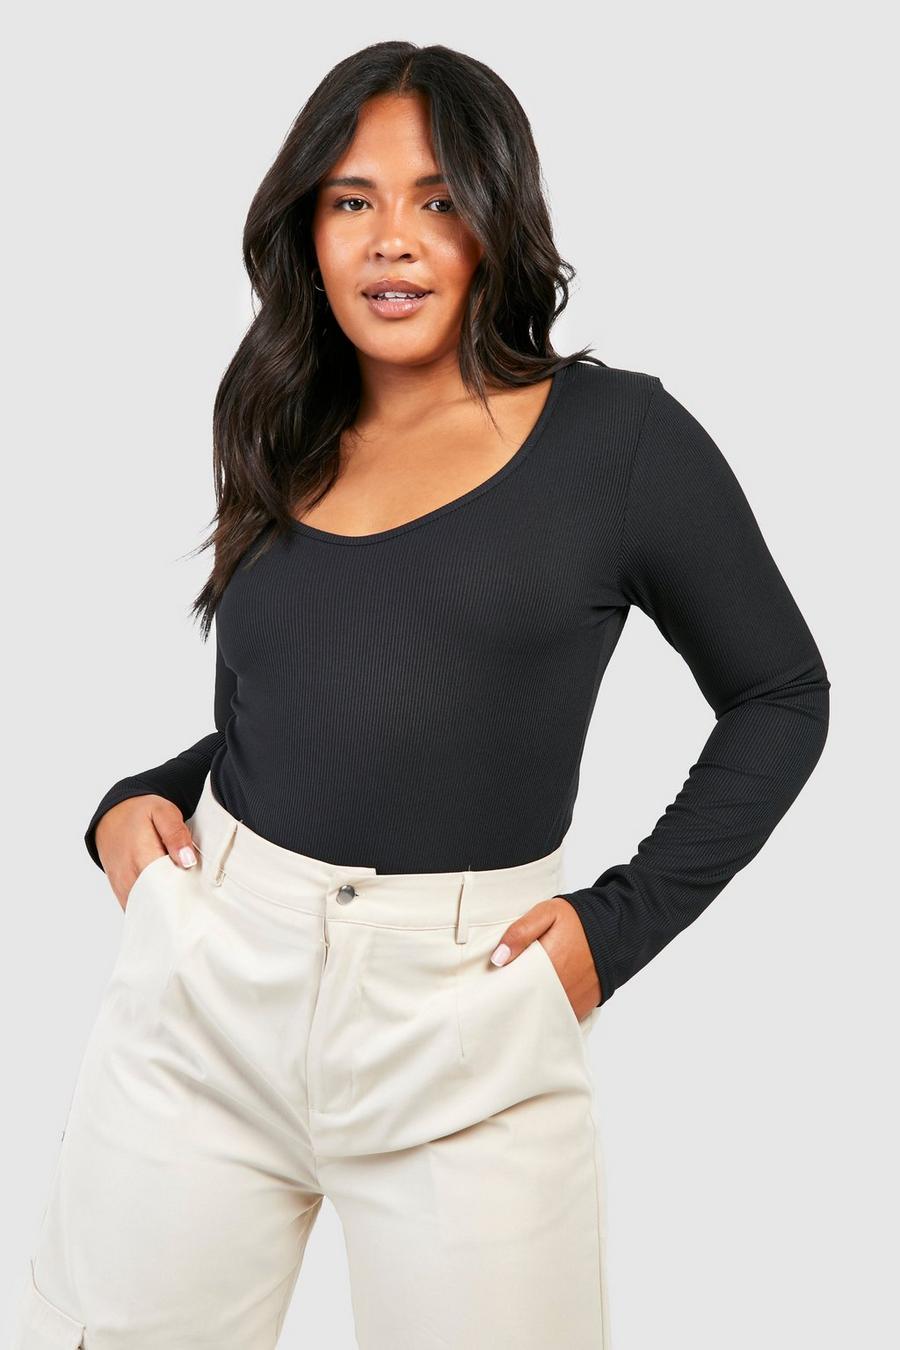 Black and Friday Womens Clothing Clearance under $5 GaThRRgYP Womens Plus  Size Clearance $5 Tops,Women's Fashion Comfortable Casual Round Neck Short